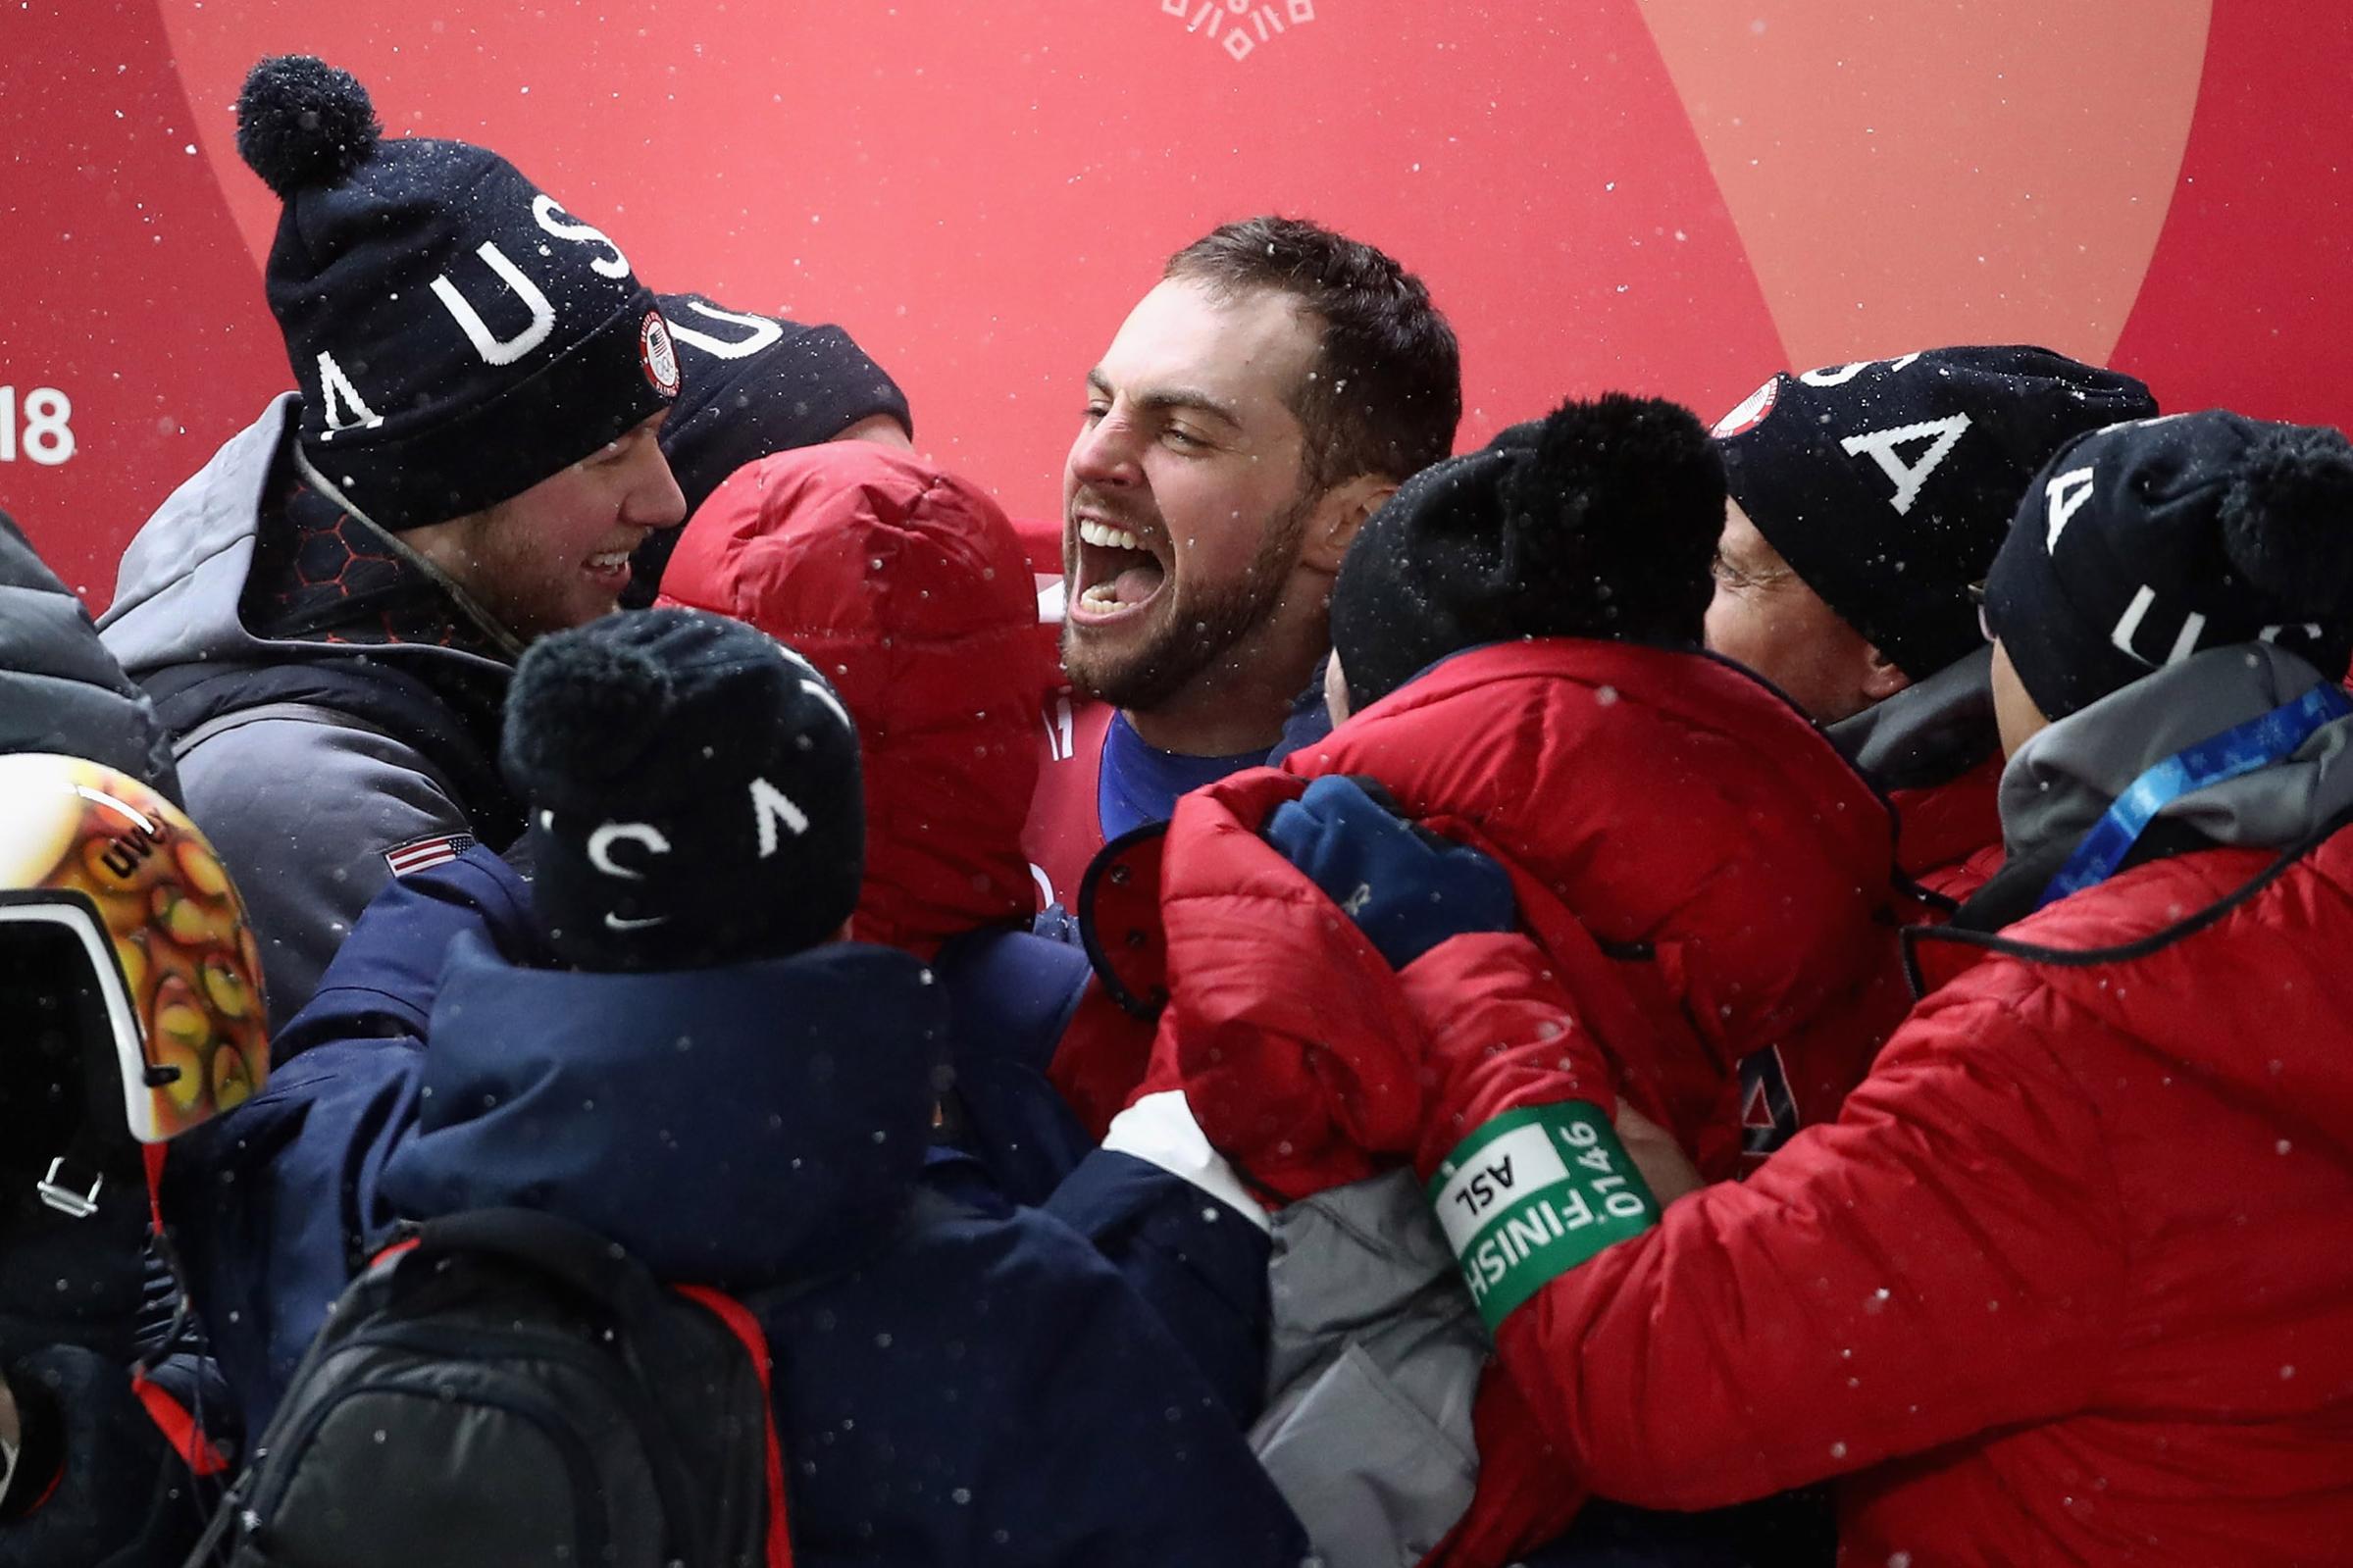 Chris Mazdzer of the United States celebrates after he won silver in the Luge Men's Singles on Feb. 11, 2018.